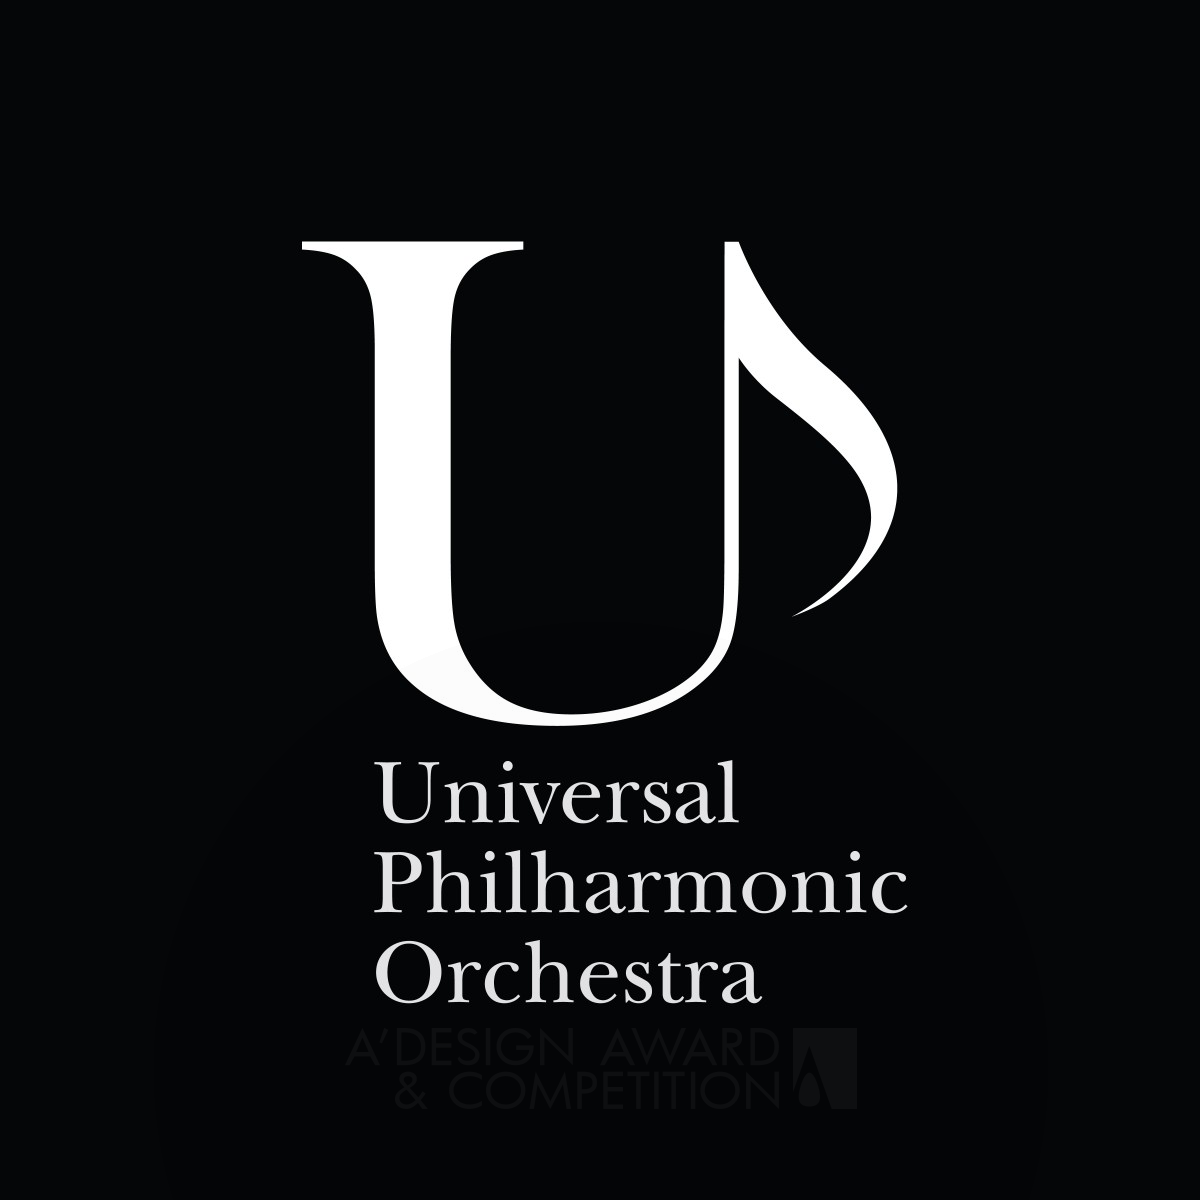 Universal Philharmonic Orchestra Corporate Identity by  